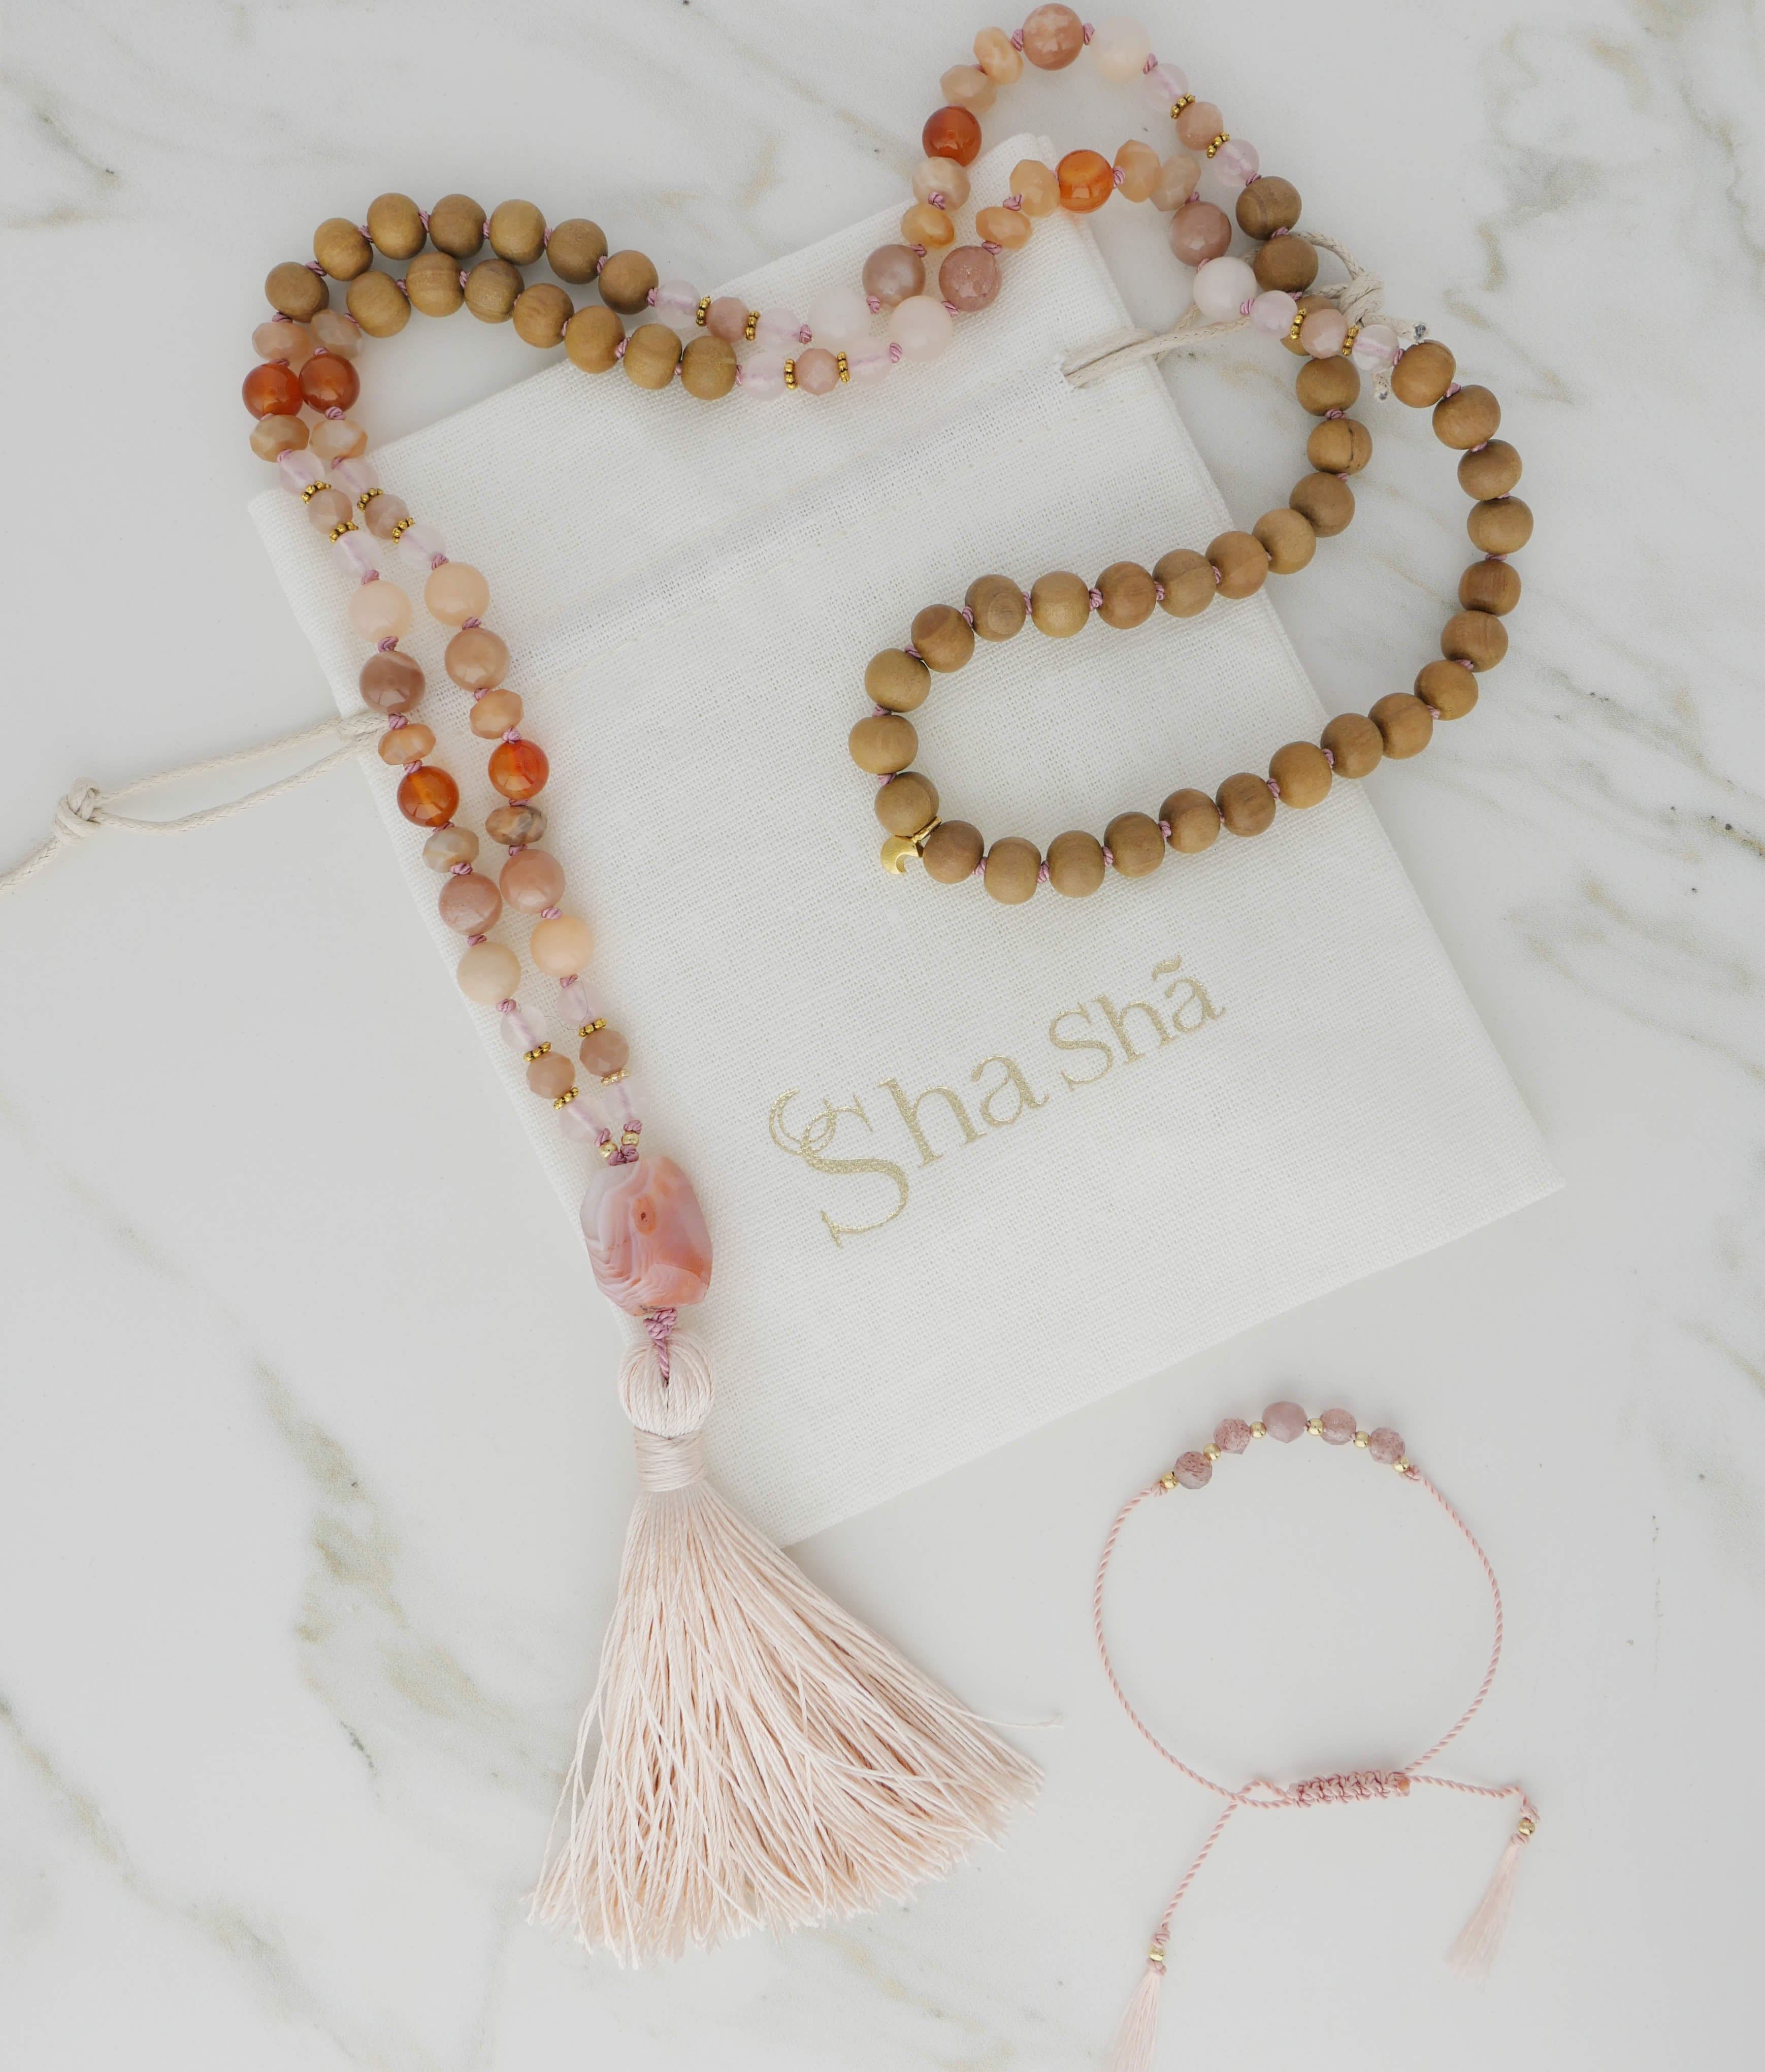 Order your personnalized mala made with healing